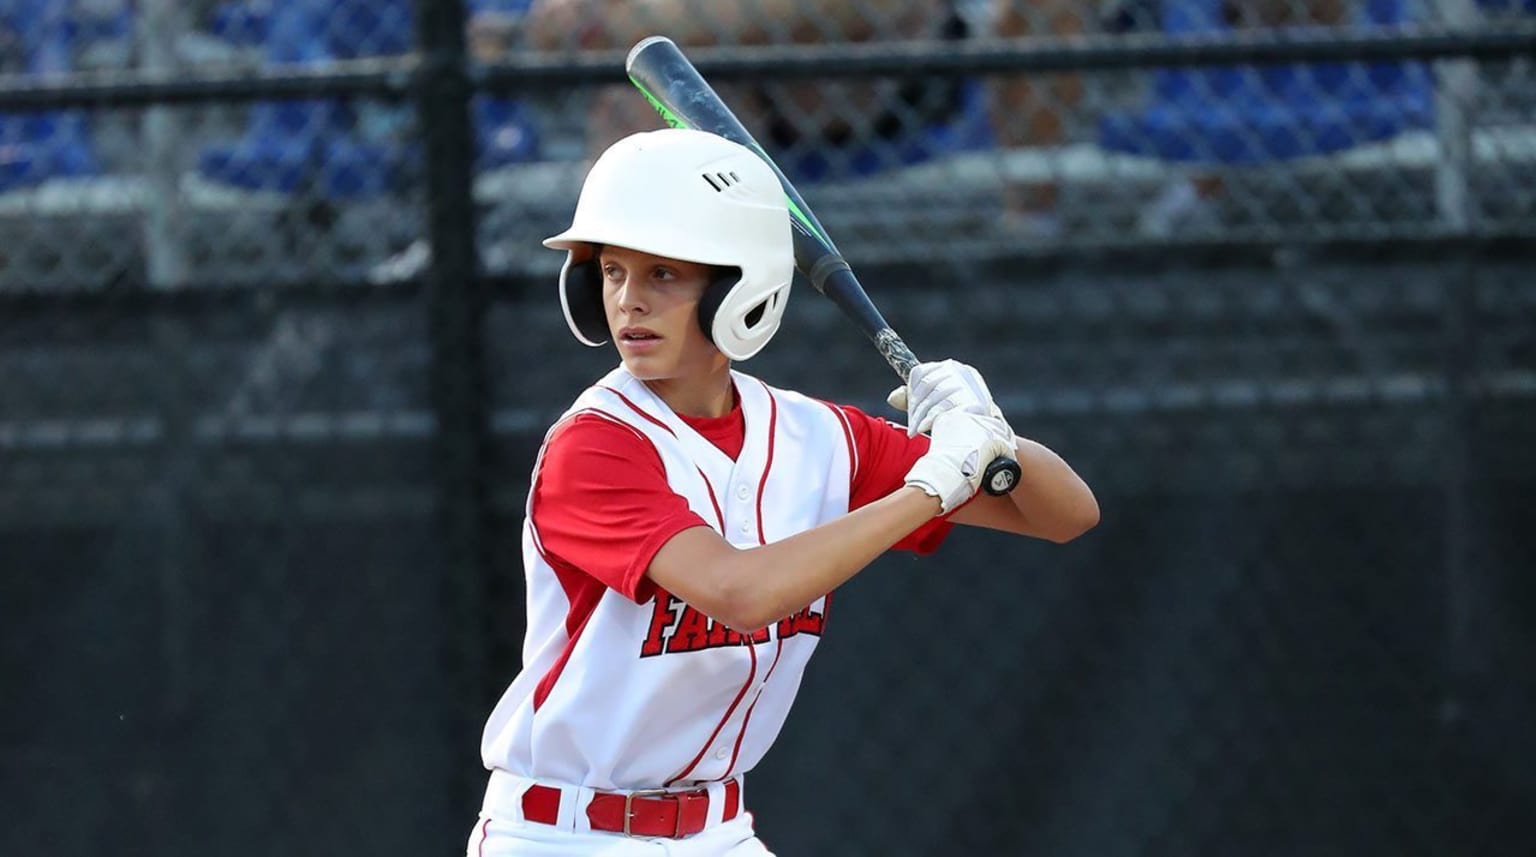 Grip, Stance, and Plate Coverage - Little League